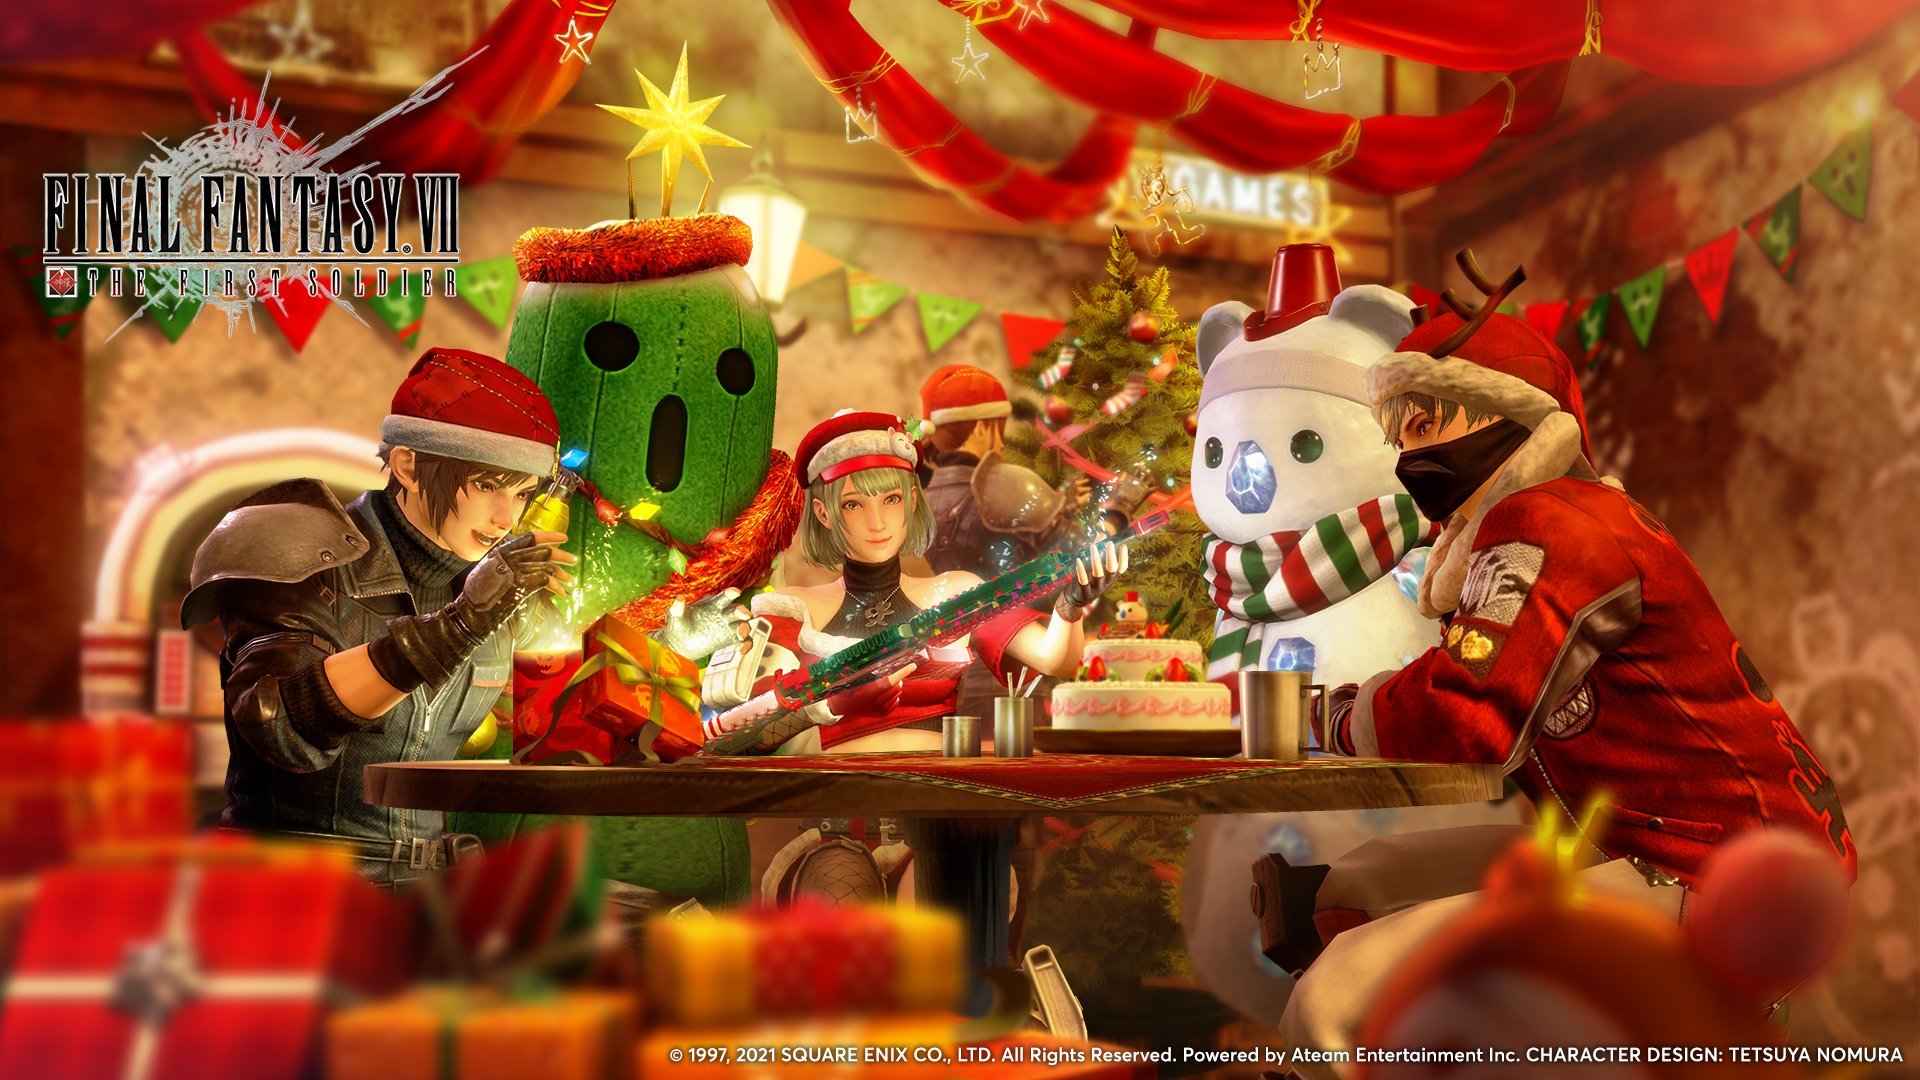 Final Fantasy VII The First Soldier เตรียมจัด Holiday Event 8 ธ.ค. นี้